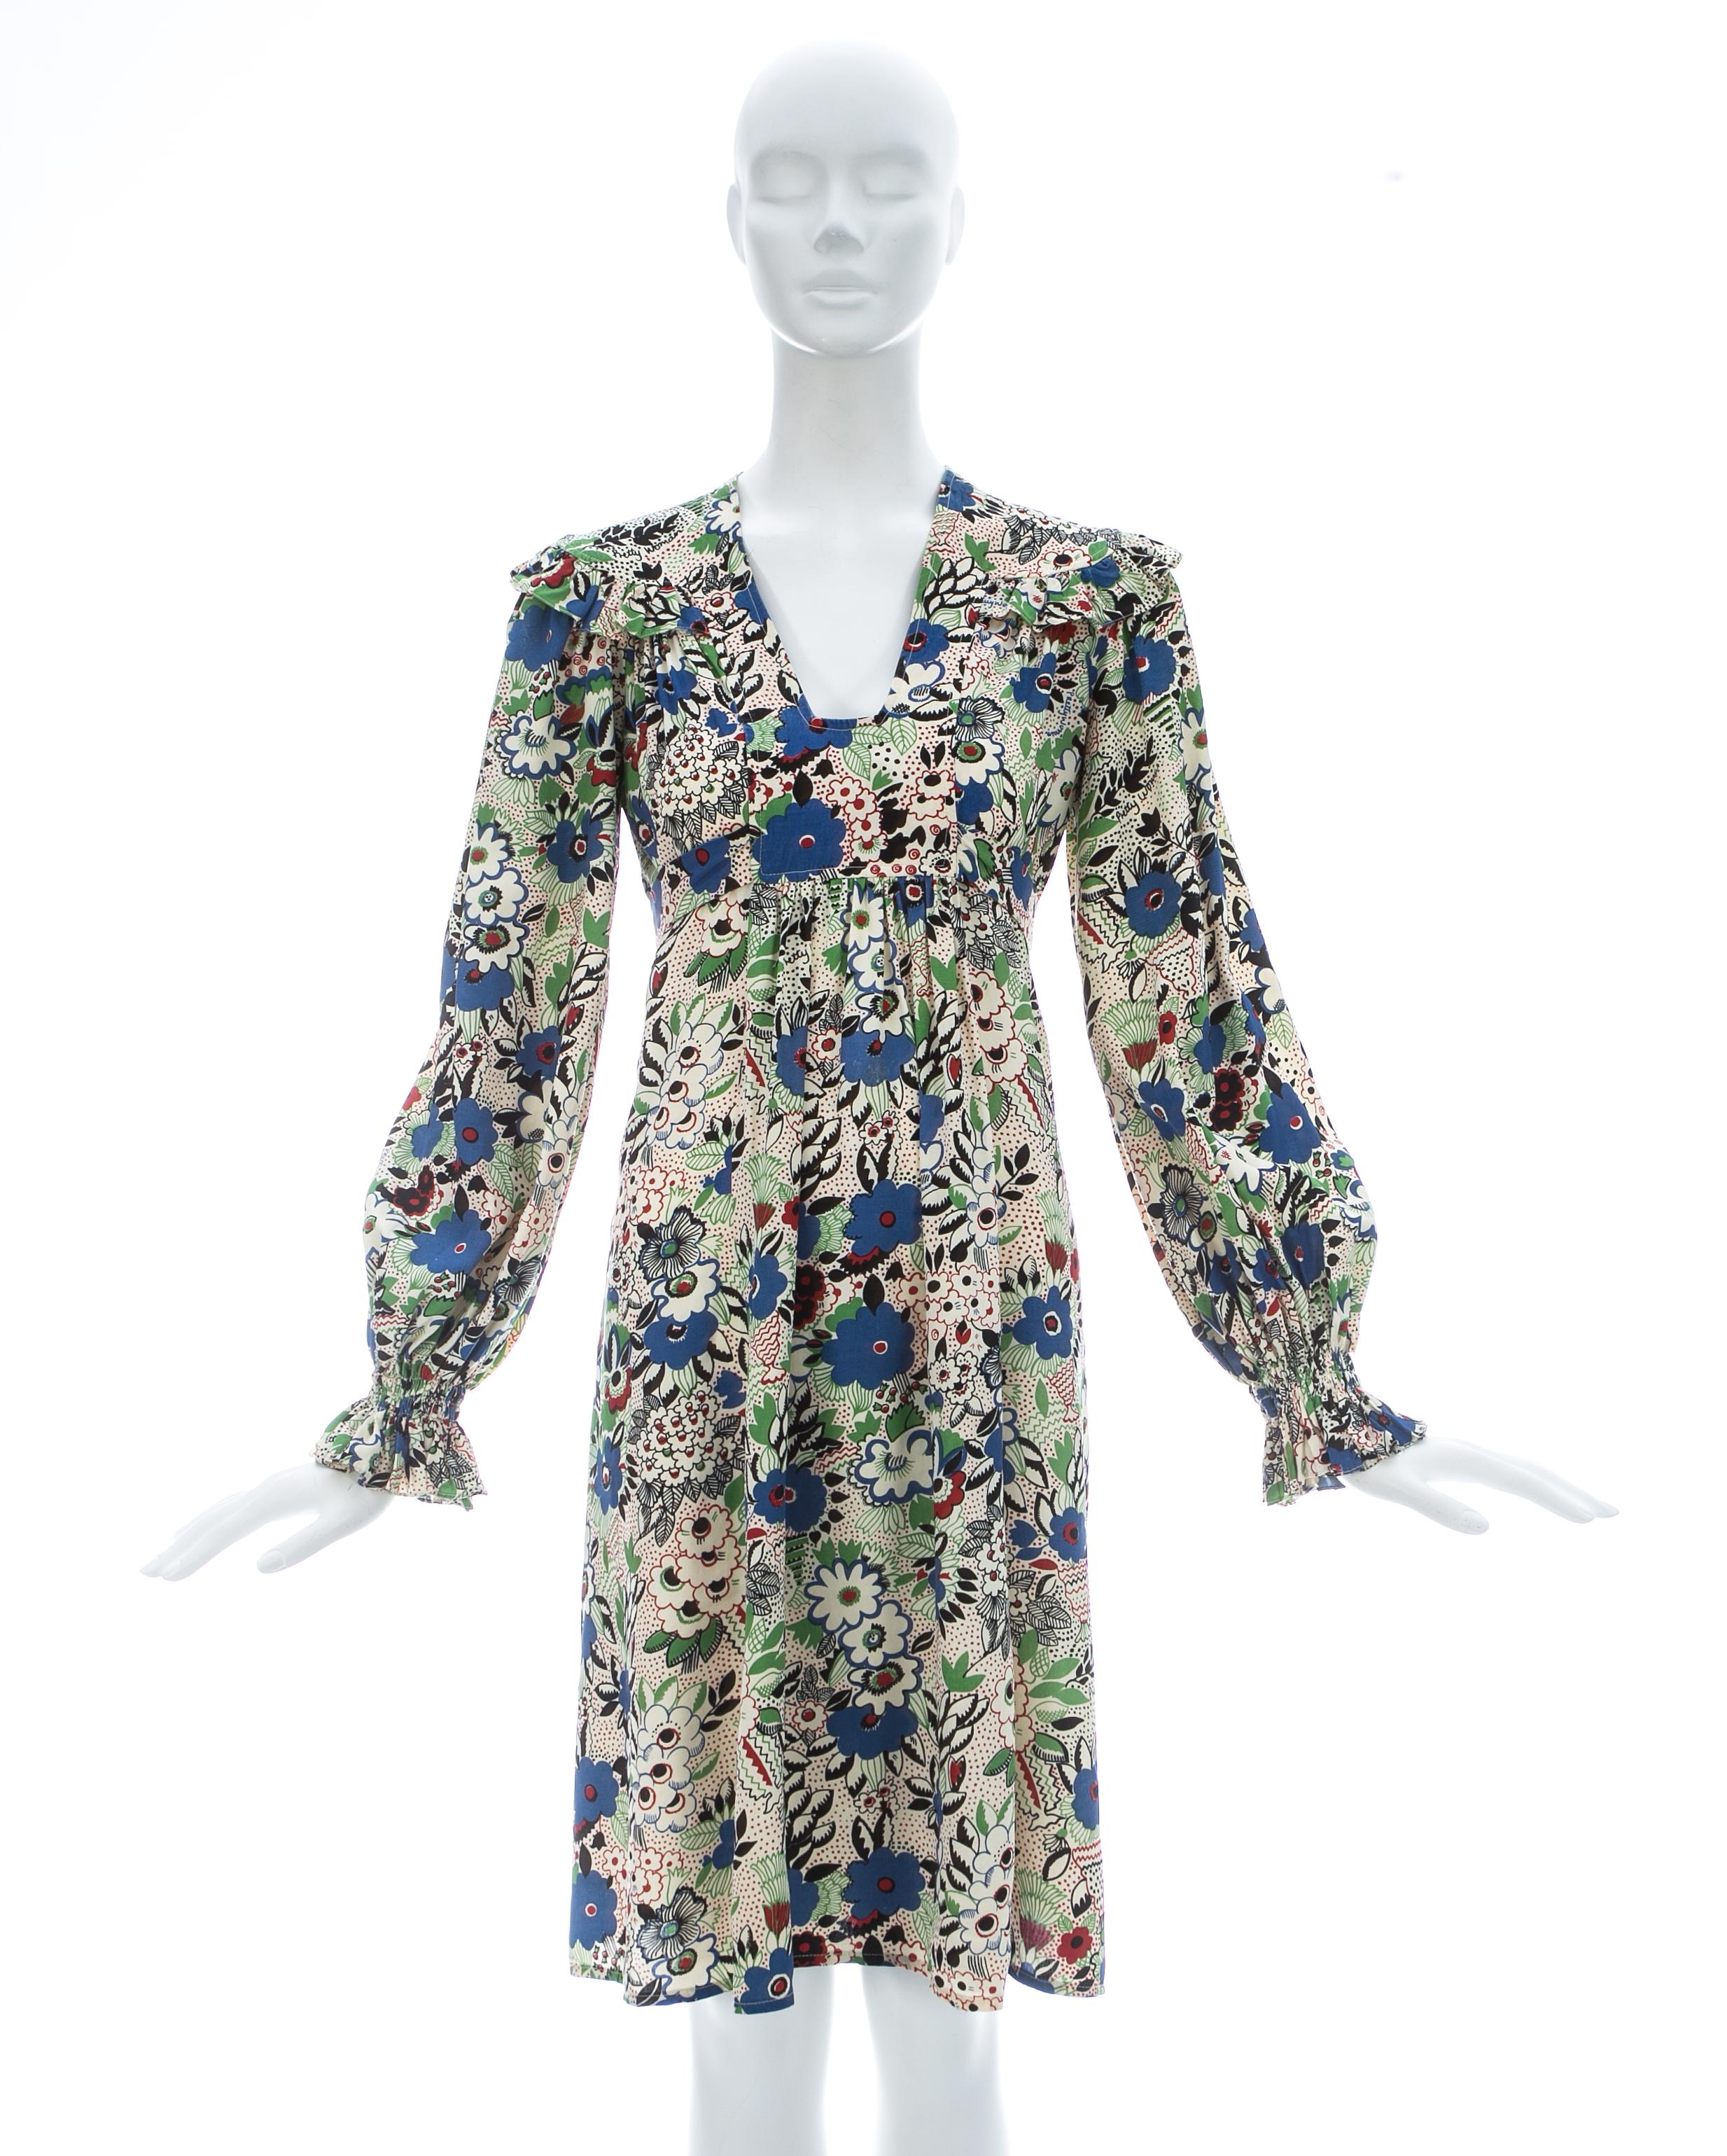 Ossie Clark; Below the knee dress with 'Pretty Woman' print by Celia Birtwell in shades of blue, green and red, smock-style with ties at the waist, and shirred cuffs

ca. 1970